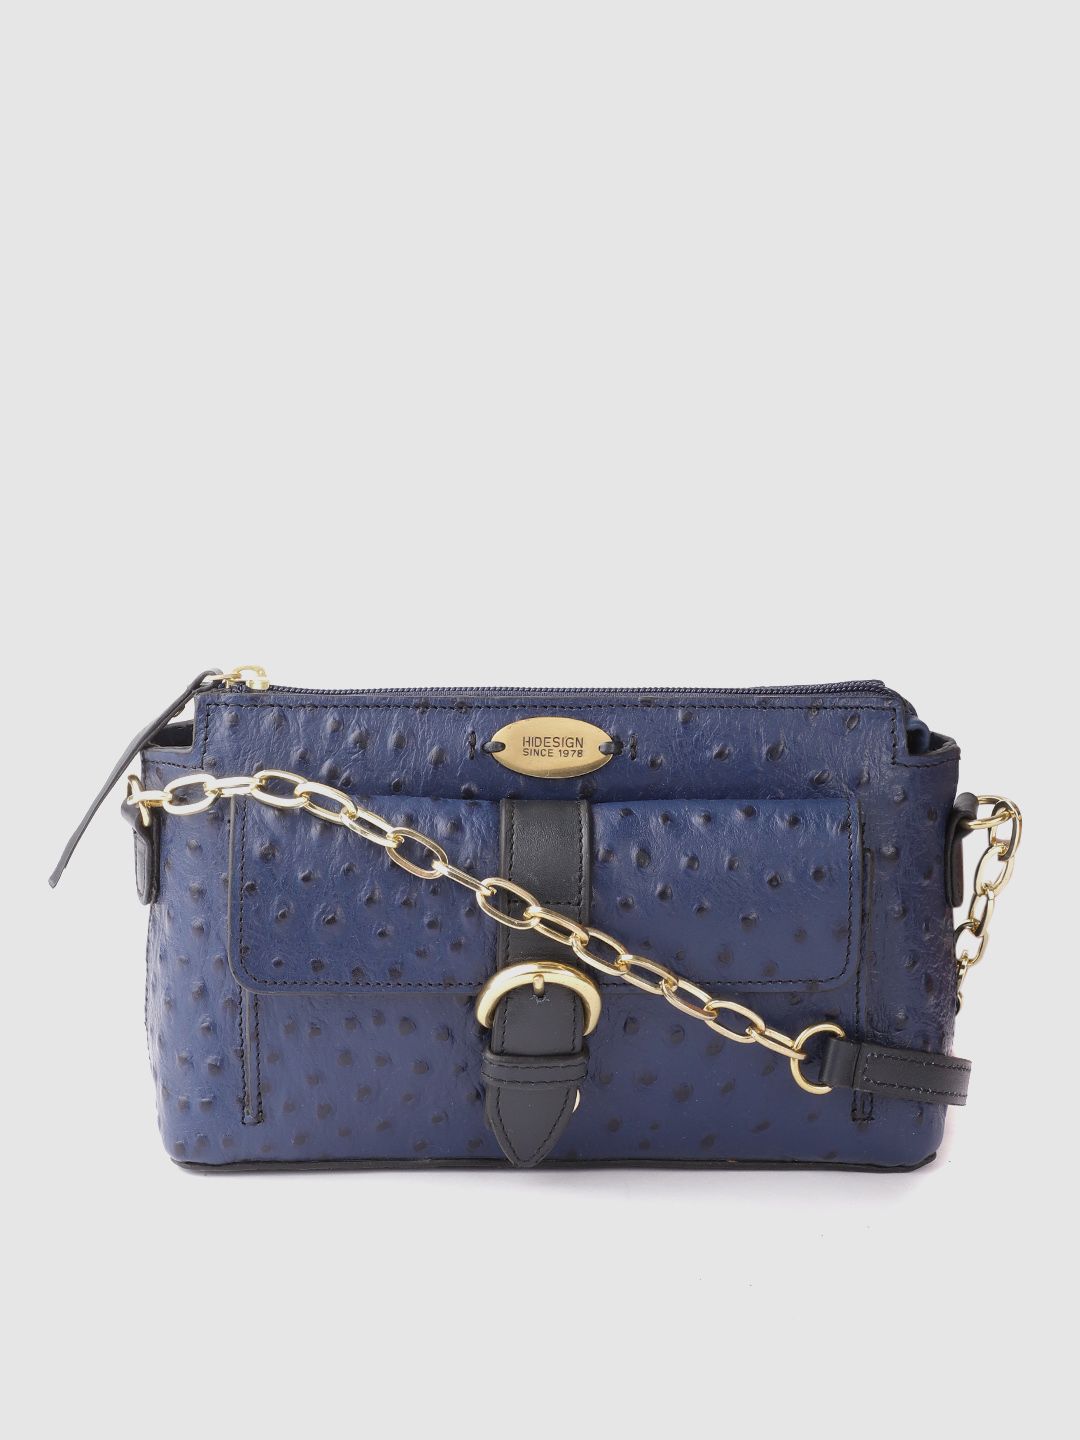 Hidesign Blue Reptile Textured Leather Structured Sling Bag Price in India